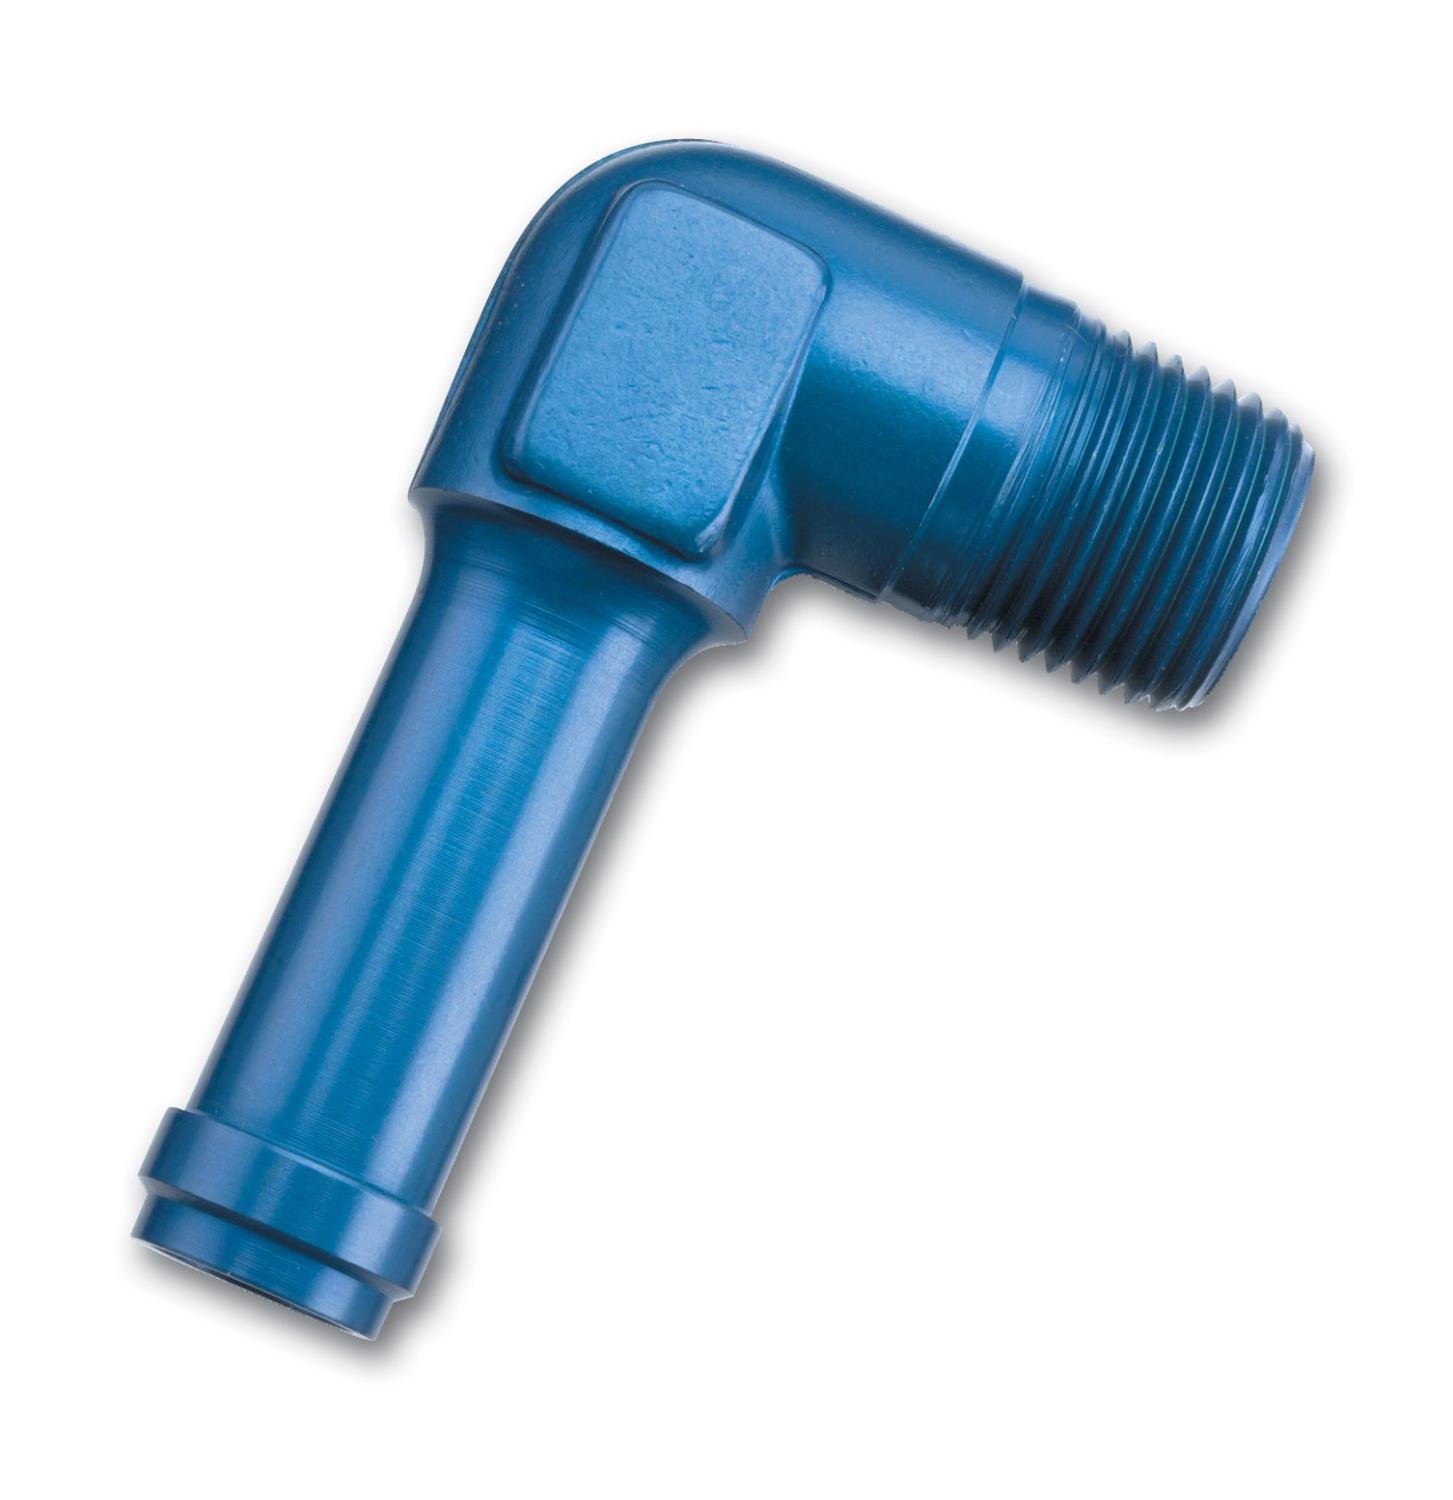 NPT Male to Hose Barb Fittings [90-Degree 1/4 in. NPT to 3/8 in. Hose]